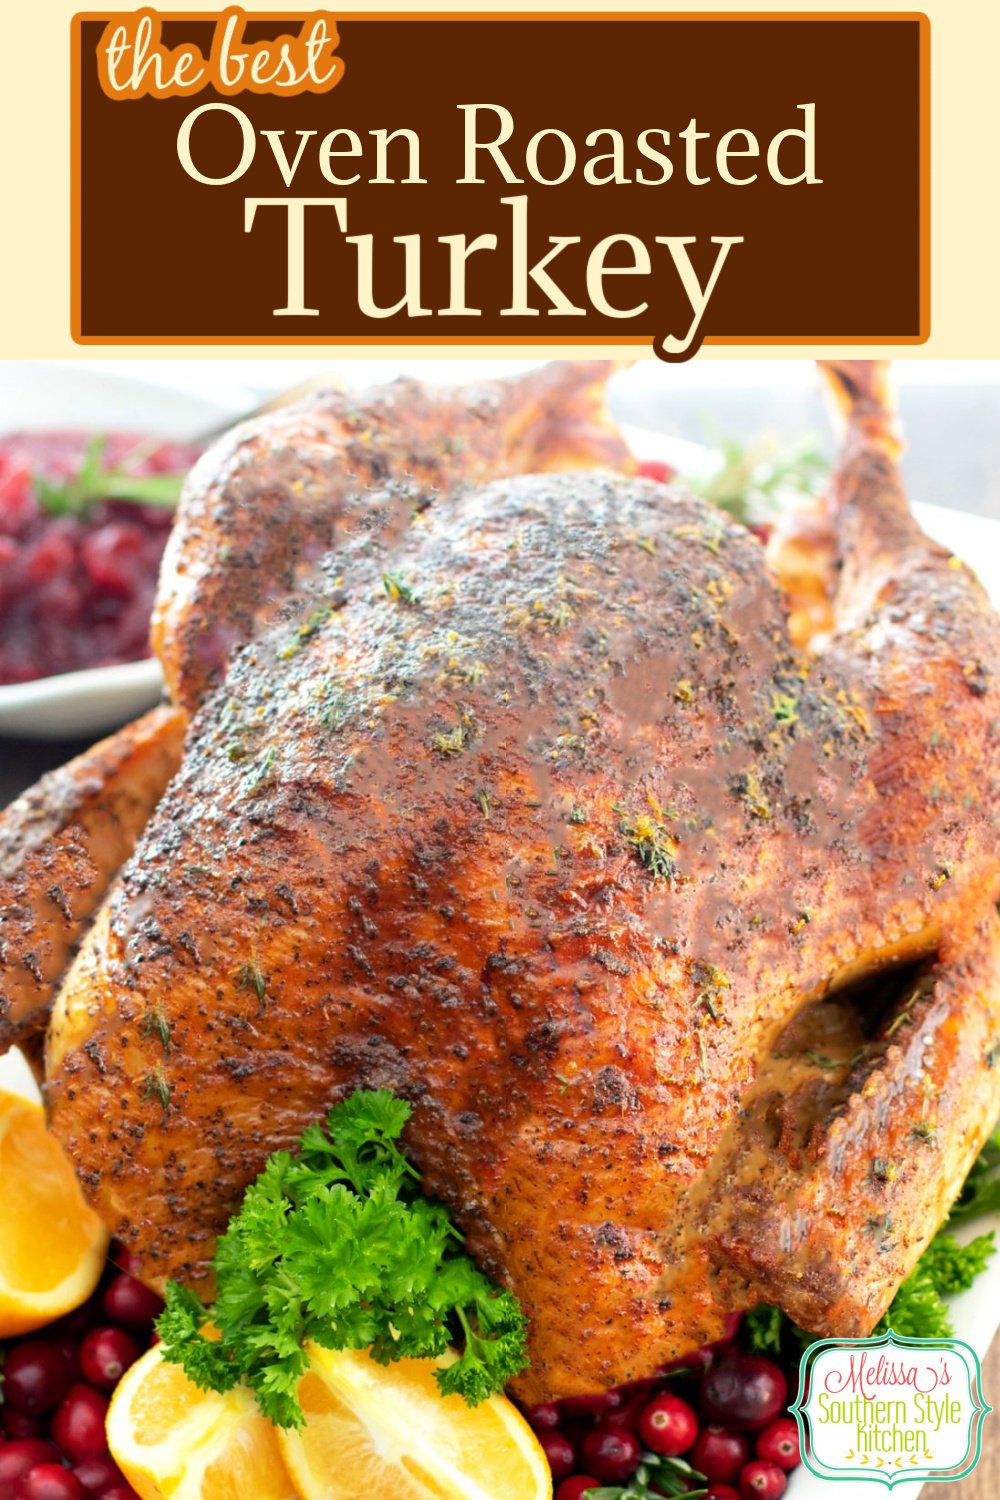 A flavorful rub and a citrus herb butter is a spectacular combination of flavor for this Oven Roasted Turkey #ovenroastedturkey #turkey #roastturkey #thanksgivingrecipes #butterbastedturkey #dinner #holidayrecipes #southernfood #southernrecipes #poultry #howtomaketurkey #christmasdinner #dinnerrecipes